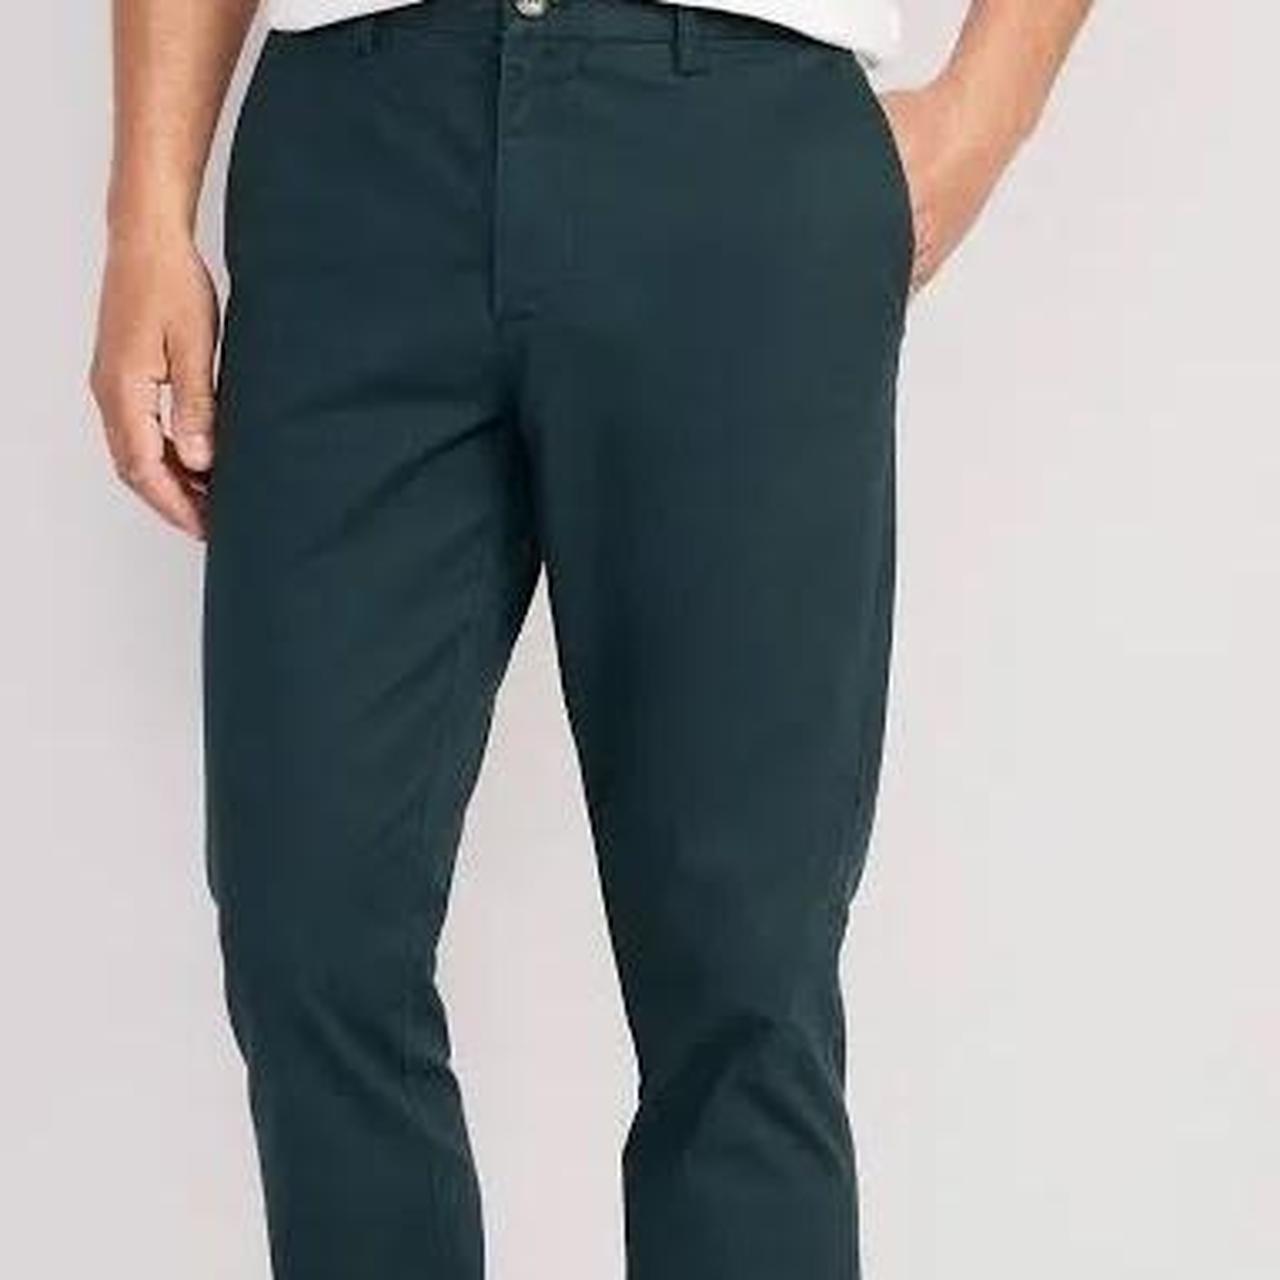 Straight Ultimate Built-In Flex Chino Pants